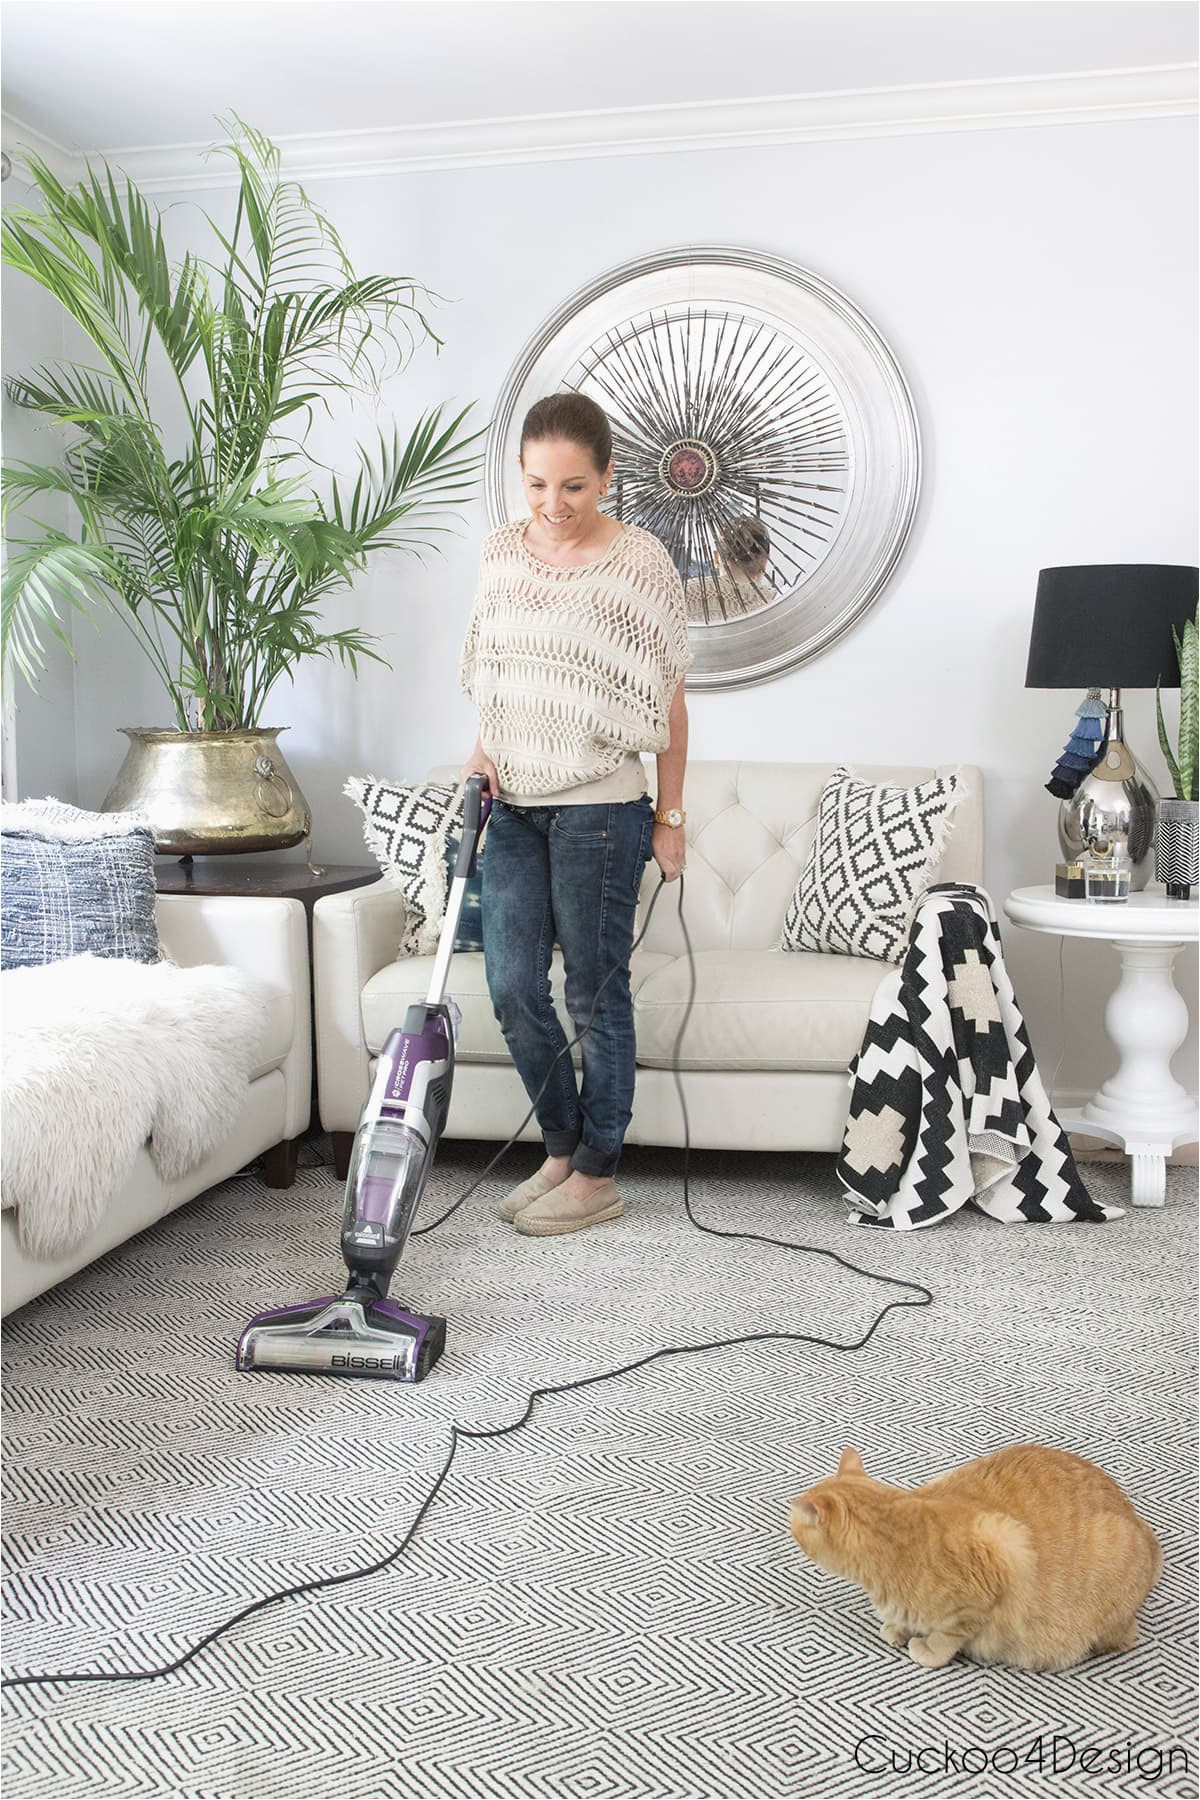 Can You Use Bissell Carpet Cleaner On area Rugs My Bissell Crosswave Pet Pro Review – Cuckoo4design